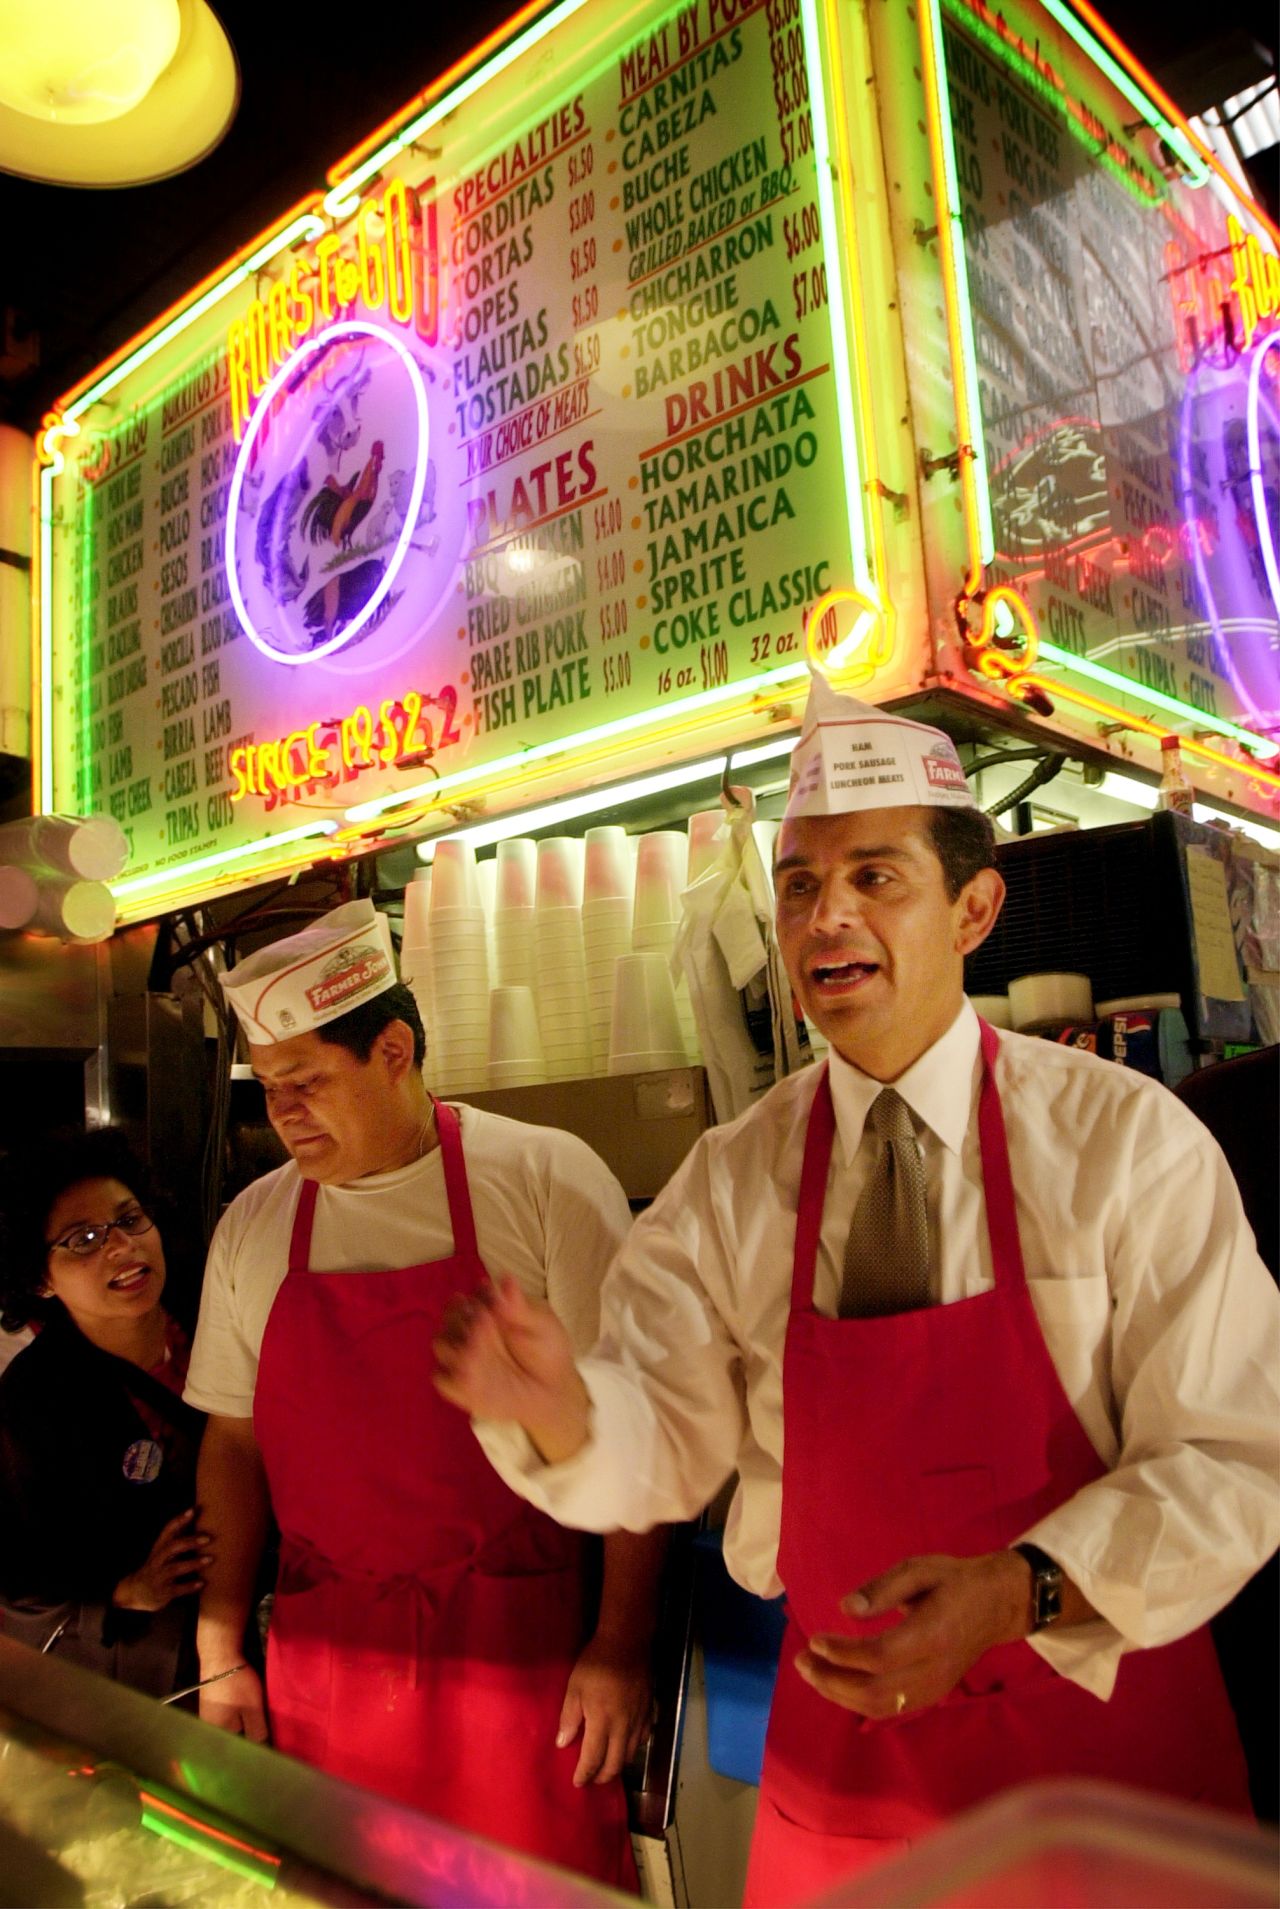 Los Angeles mayoral candidate Antonio Villaraigosa takes orders for tacos in the Grand Central Market on election day, in 2001.